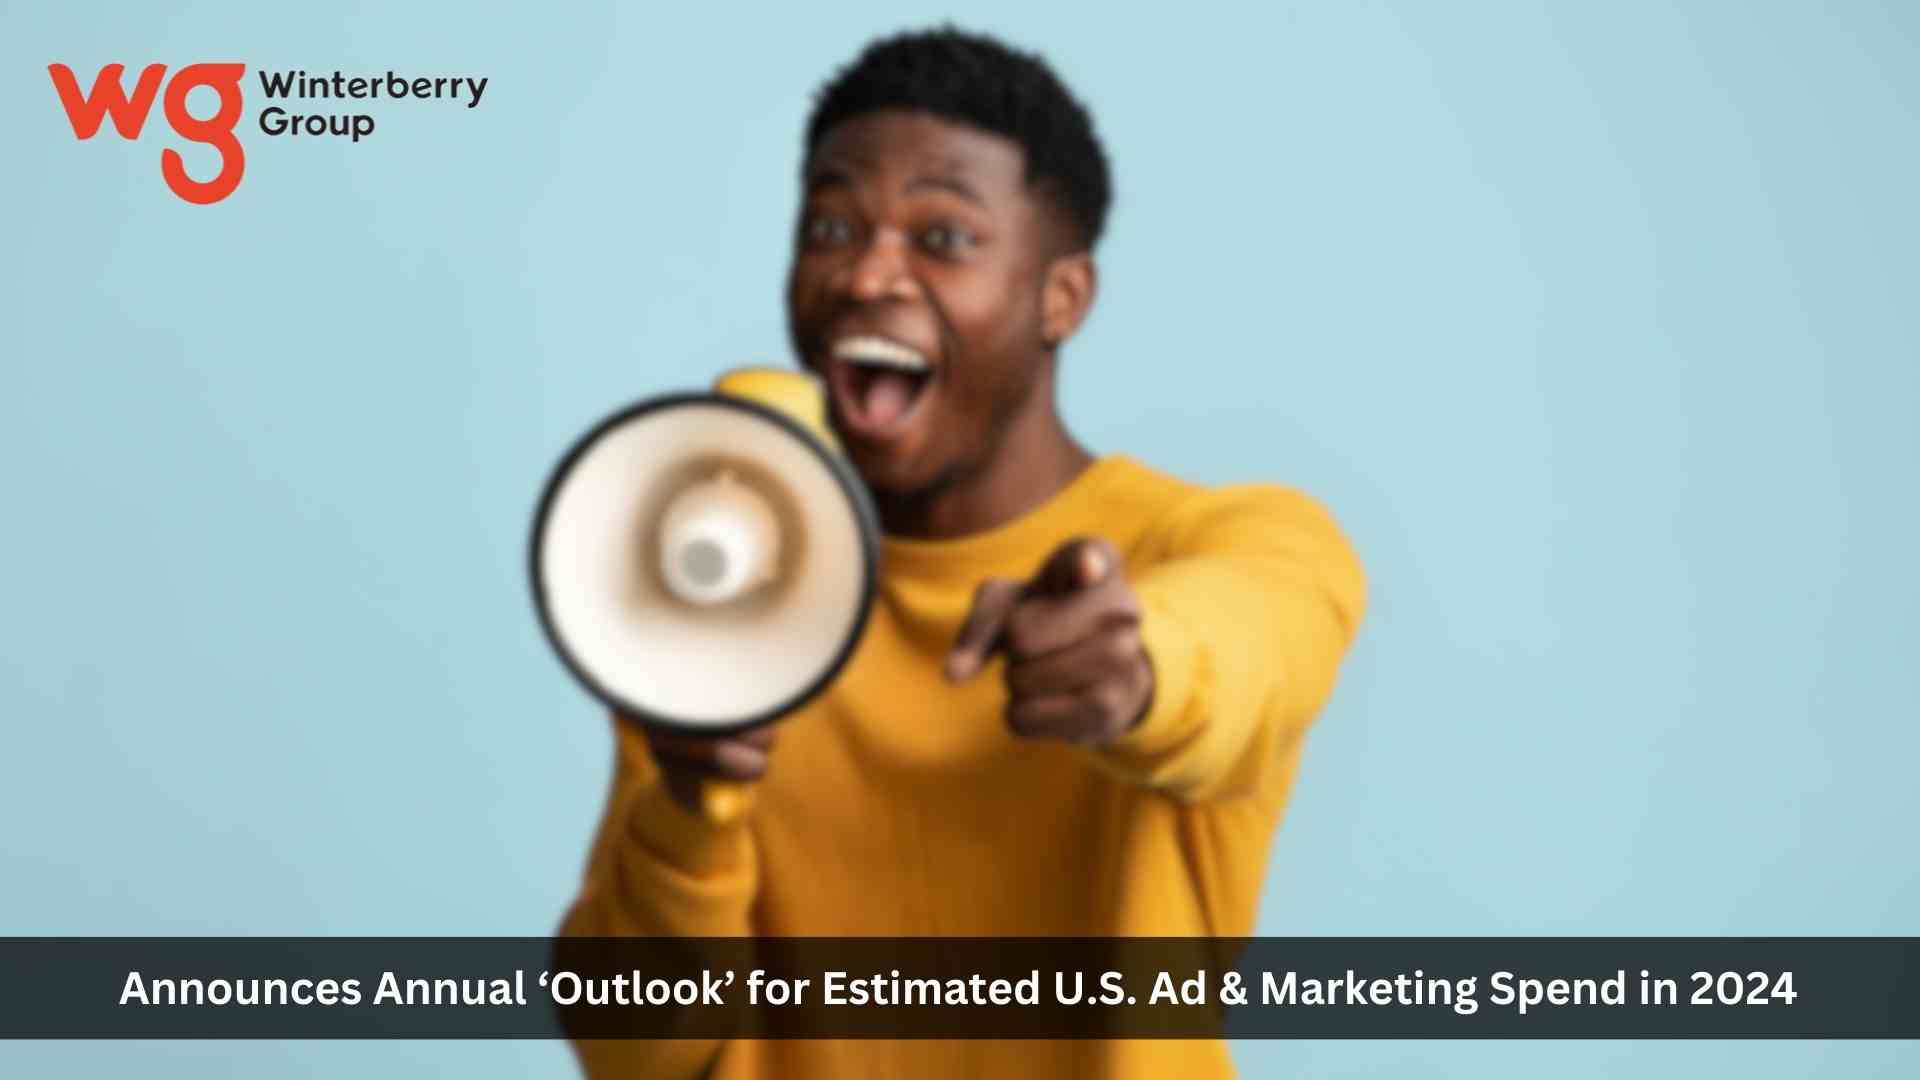 Winterberry Group Announces Annual ‘Outlook’ for Estimated U.S. Ad & Marketing Spend in 2024 – Fueled by Digital Ad Growth, Connected TV, Data Infrastructure Demand & Election Cycle